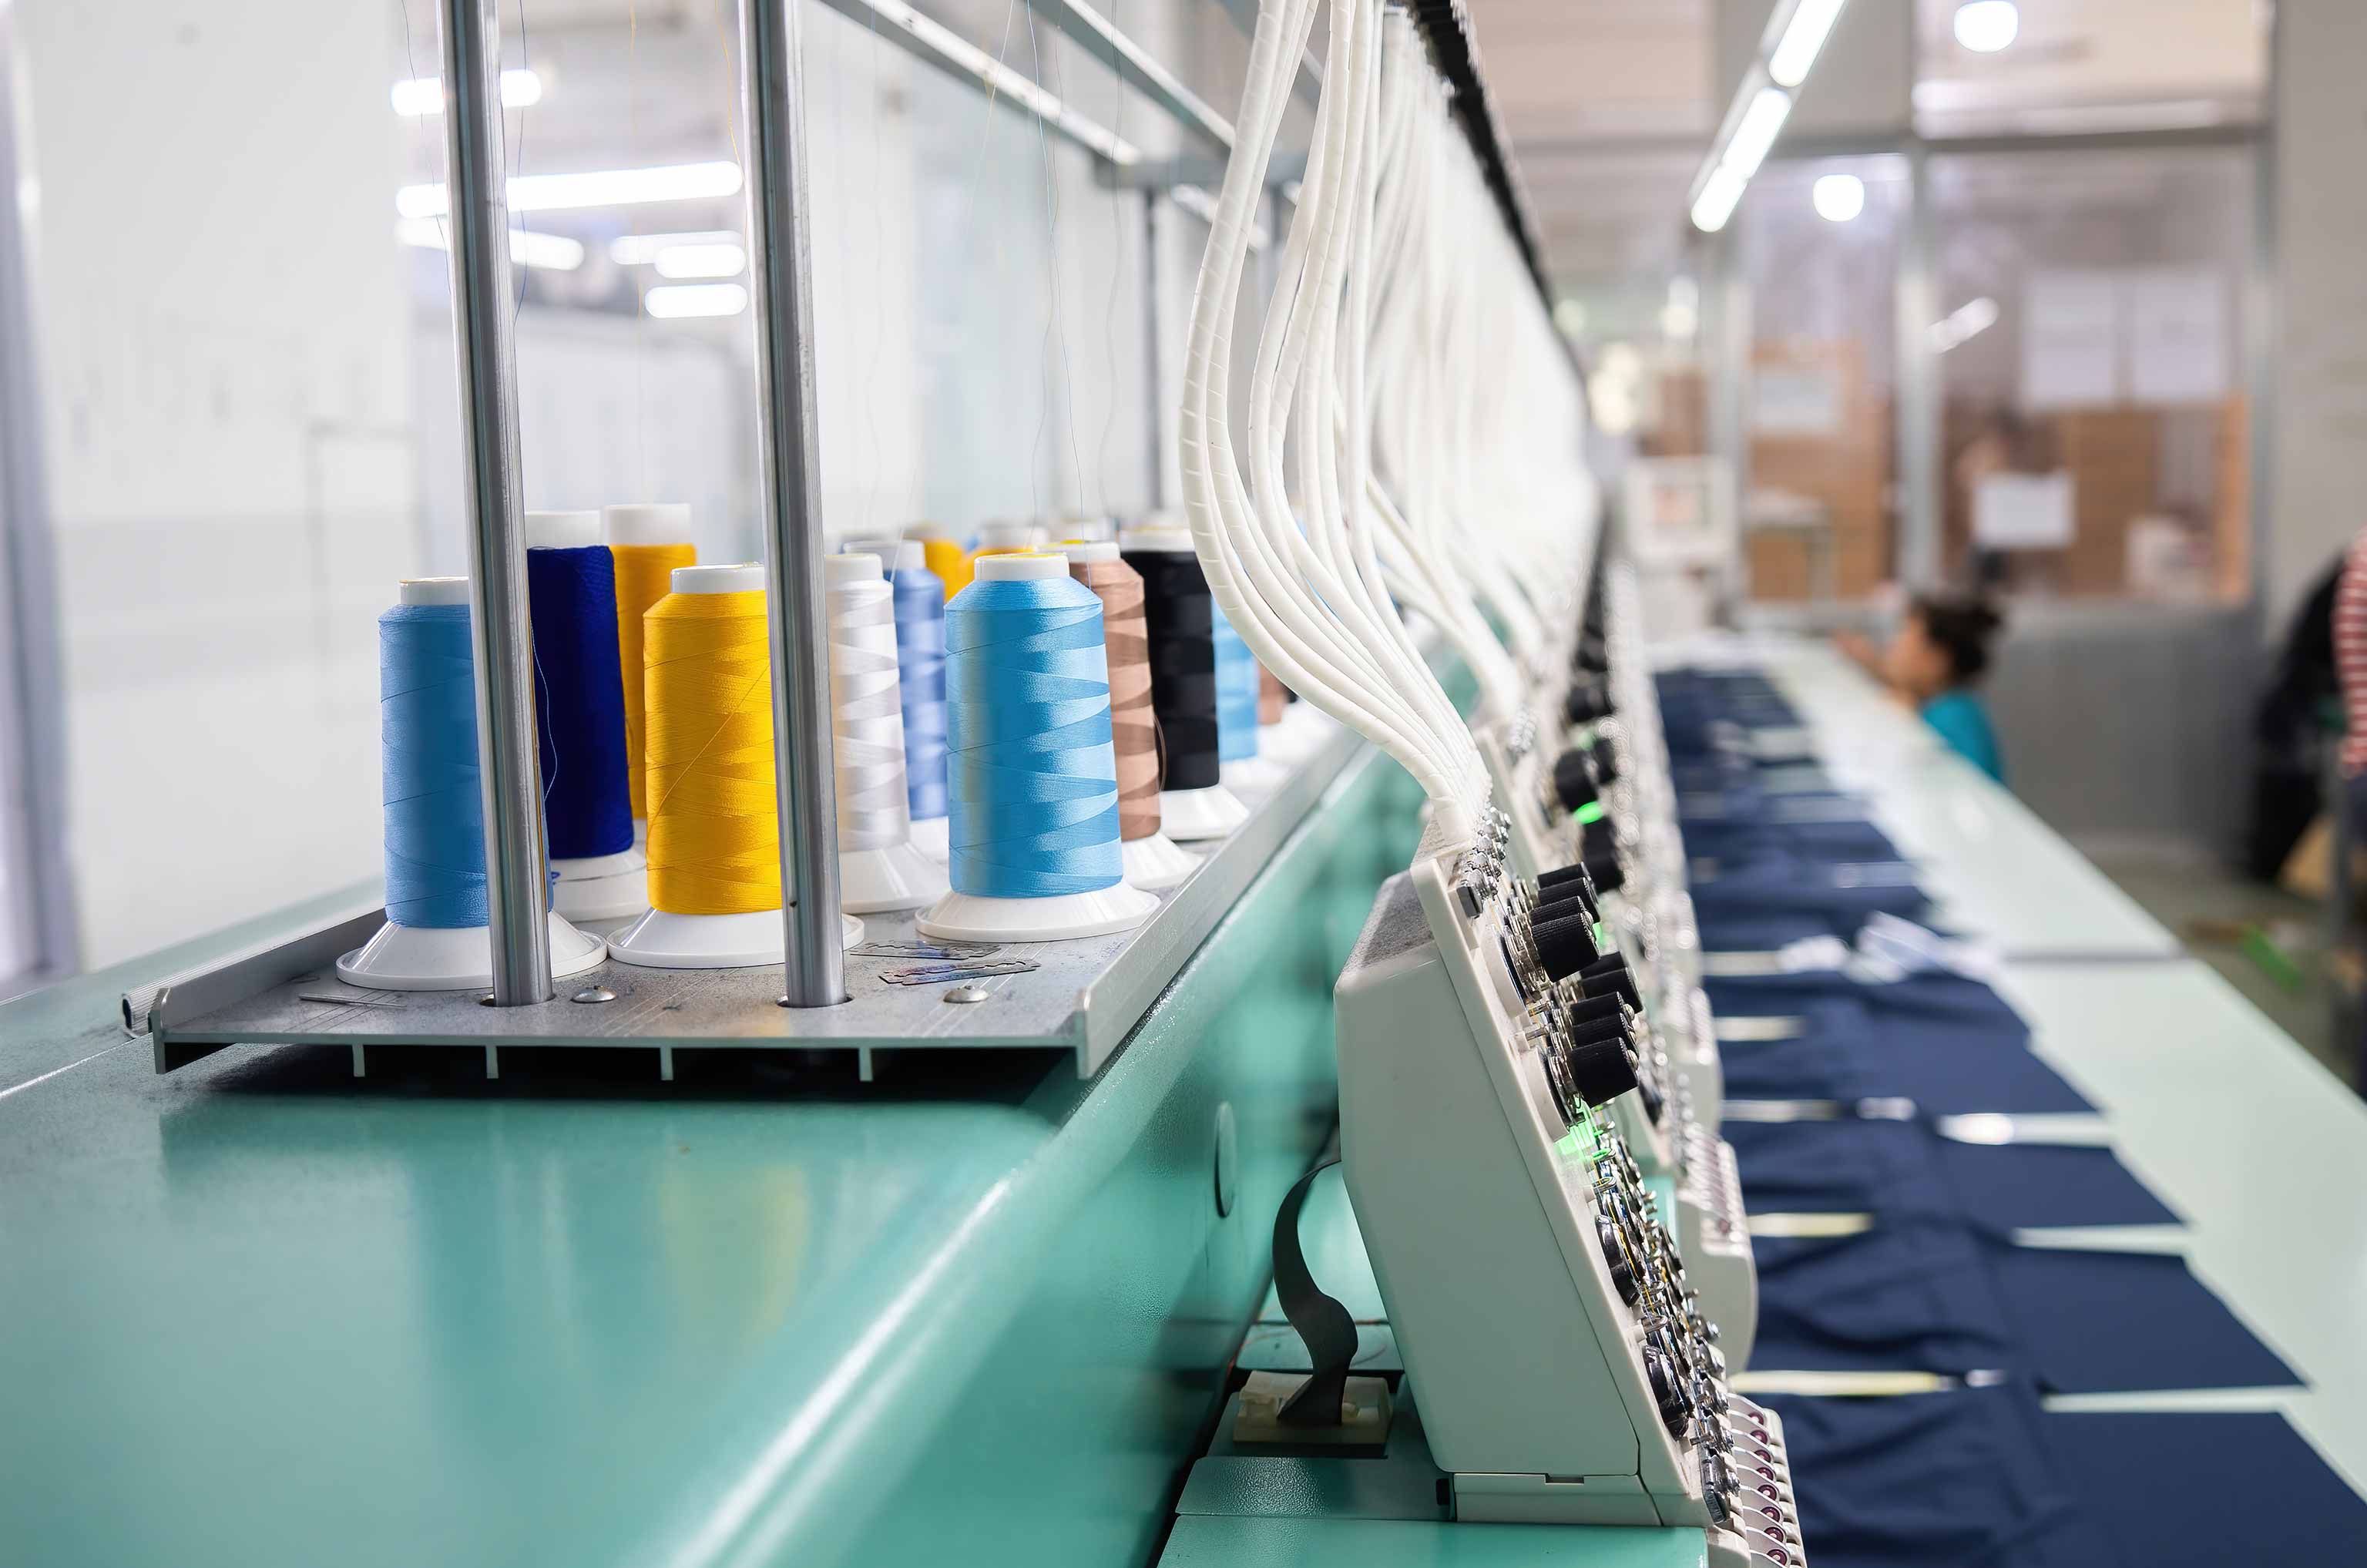 5 Benefits of Adopting a Smart Factory Model in Textile Manufacturing